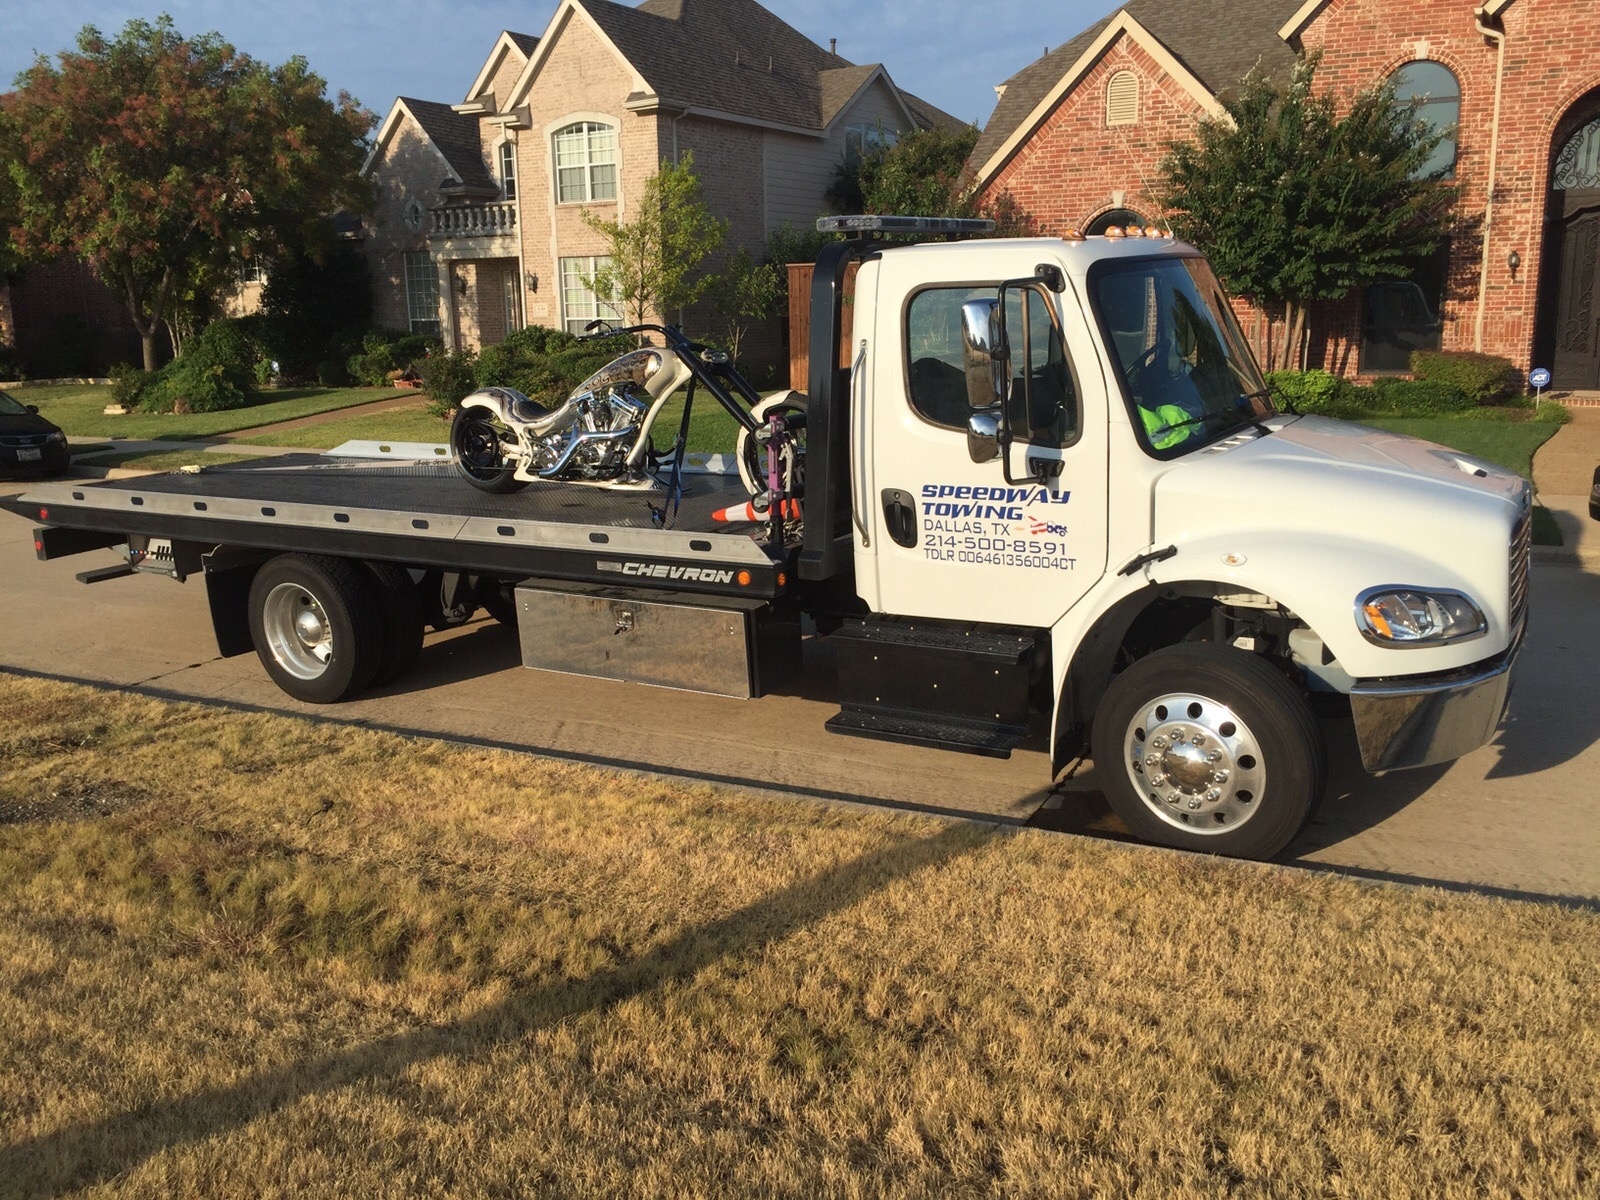 Call for a towing service you can rely on!